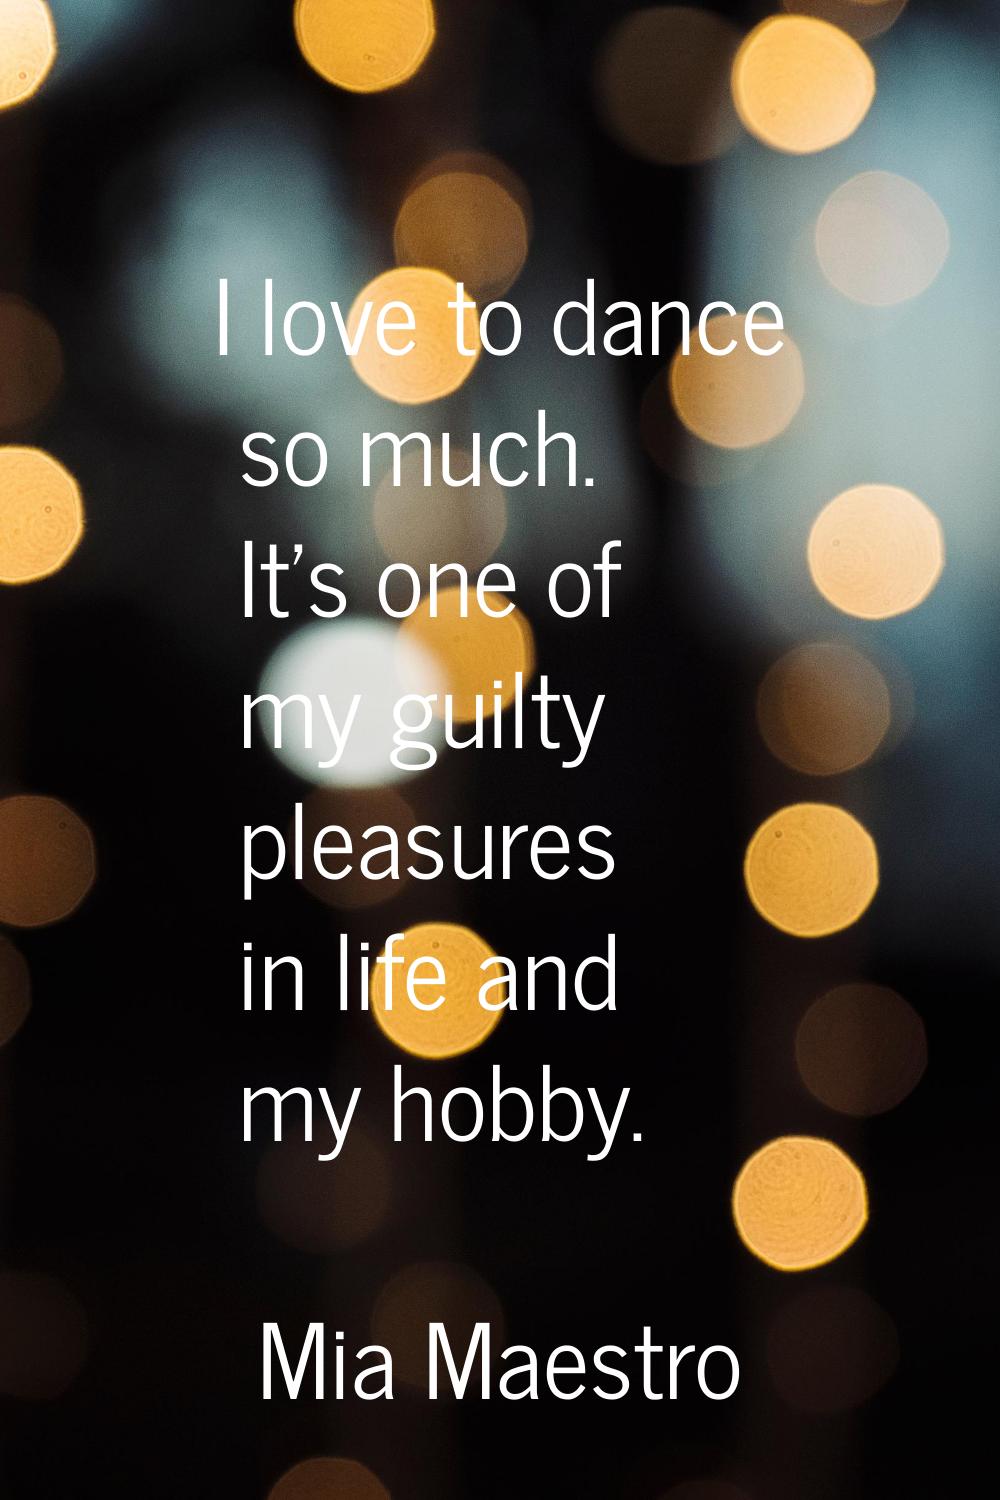 I love to dance so much. It's one of my guilty pleasures in life and my hobby.